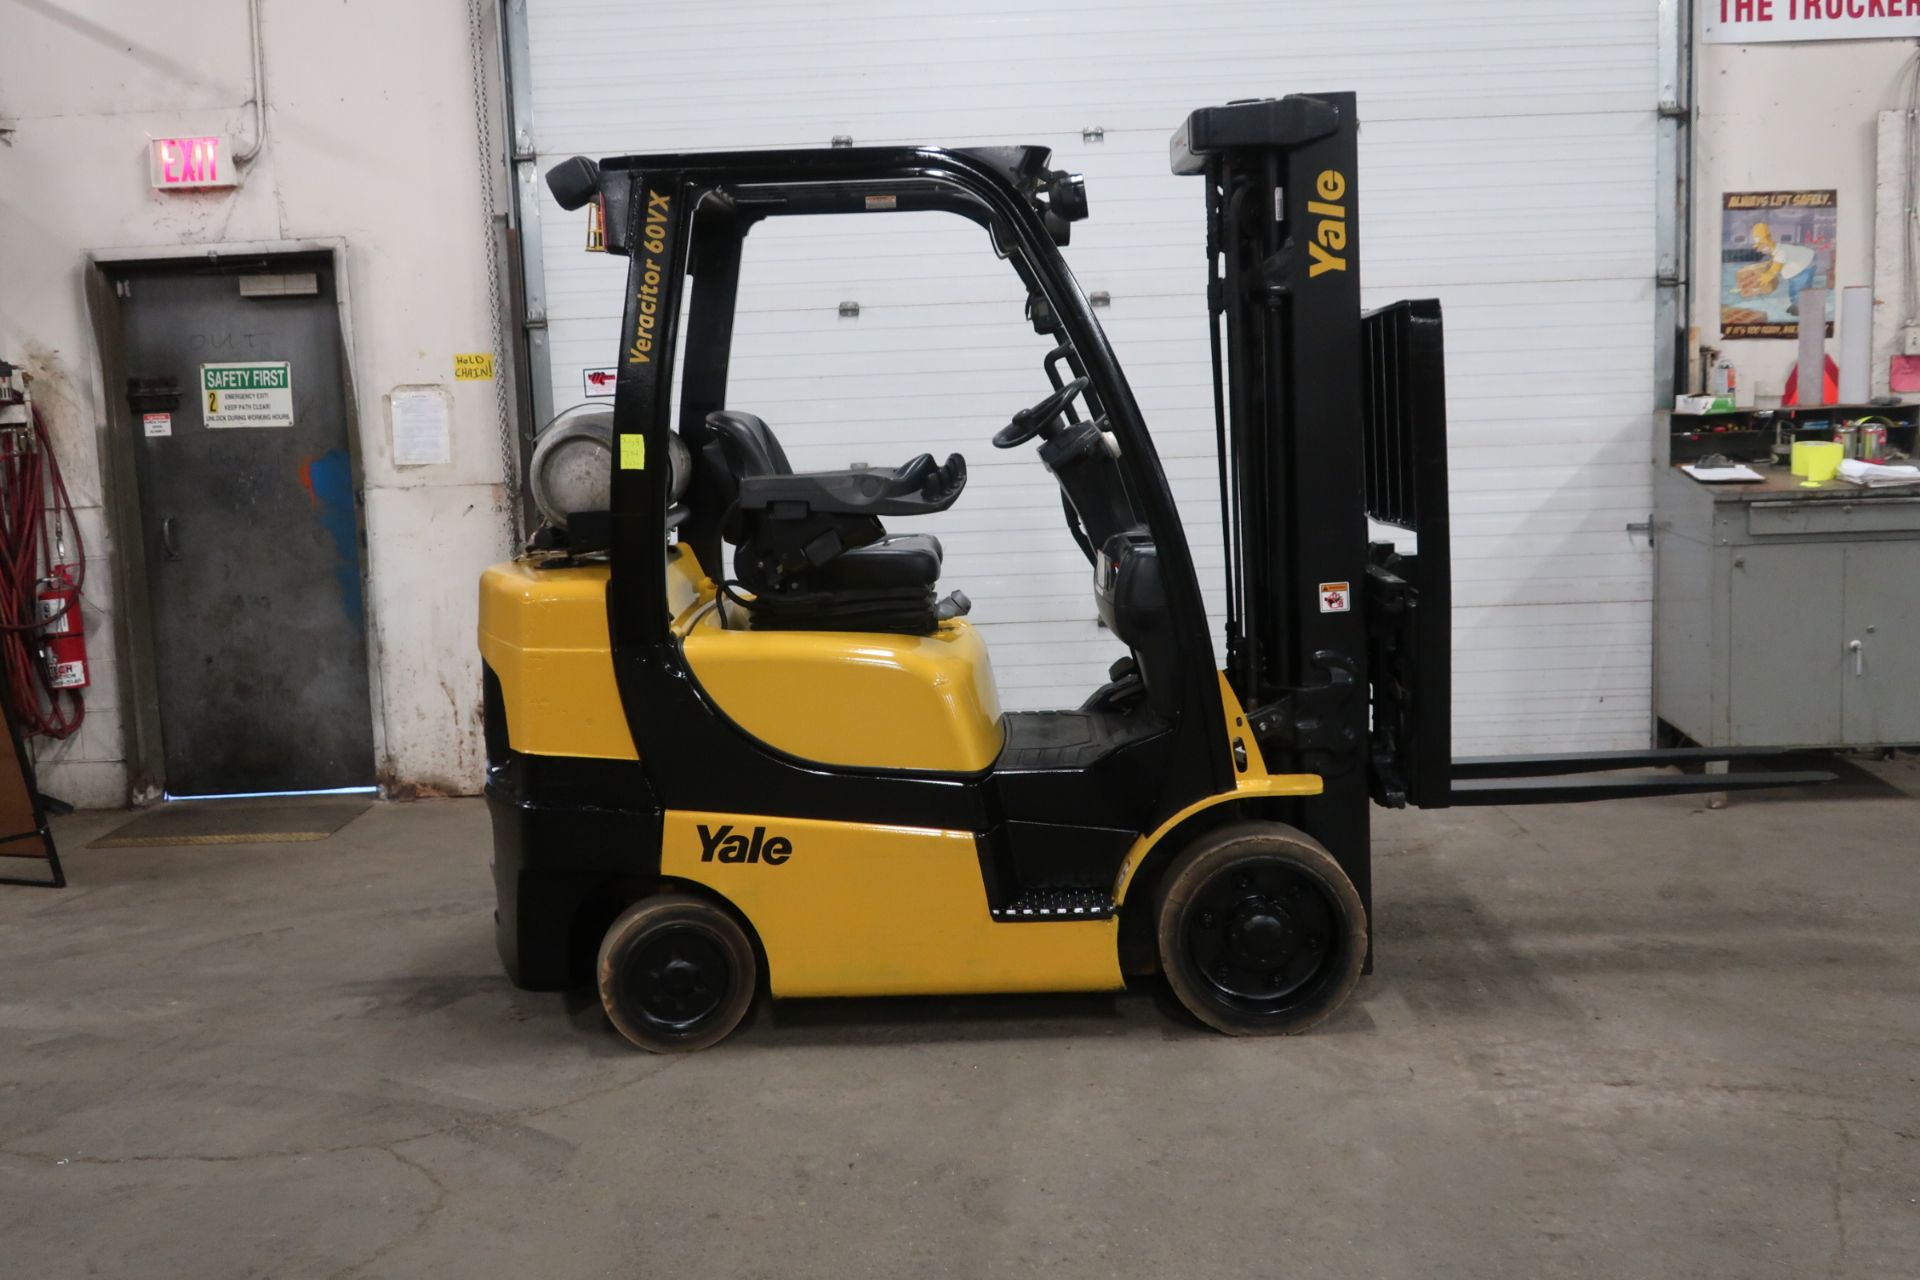 FREE CUSTOMS - 2015 Yale 6000lbs Capacity Forklift with 3-stage mast & sideshift & Fork Positioner